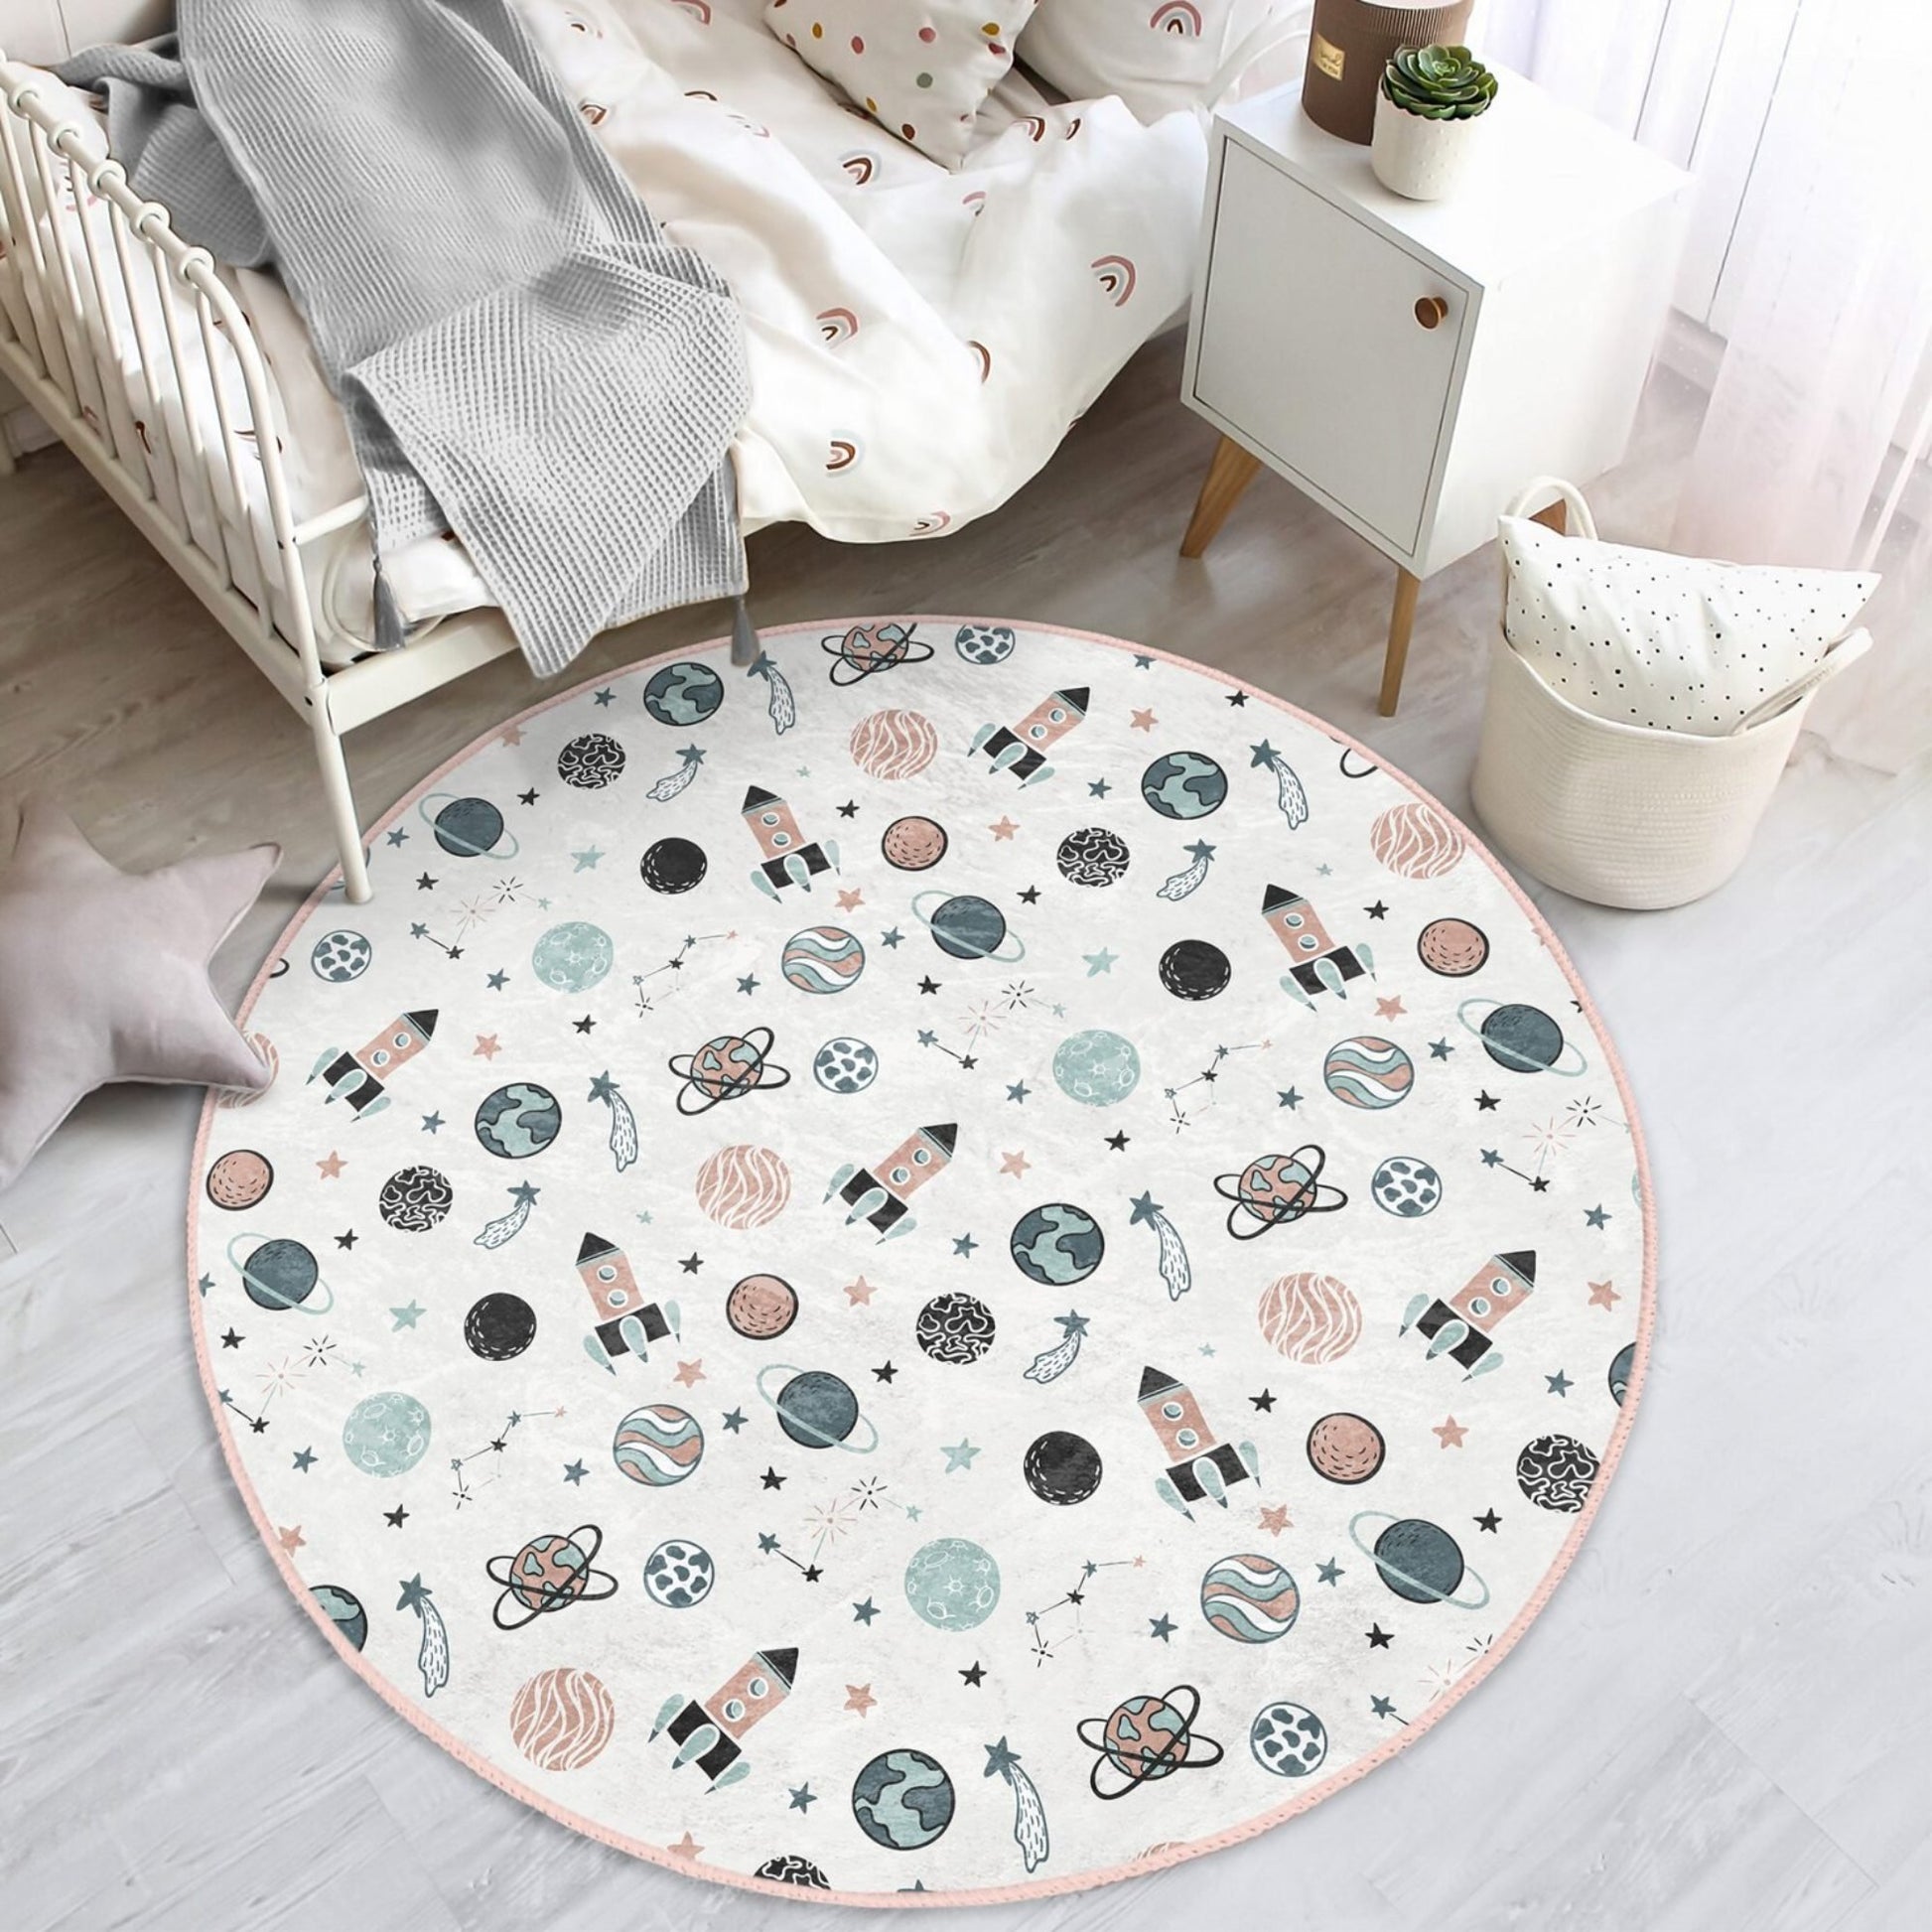 Rug with Space Adventure Theme for Kids' Play Area